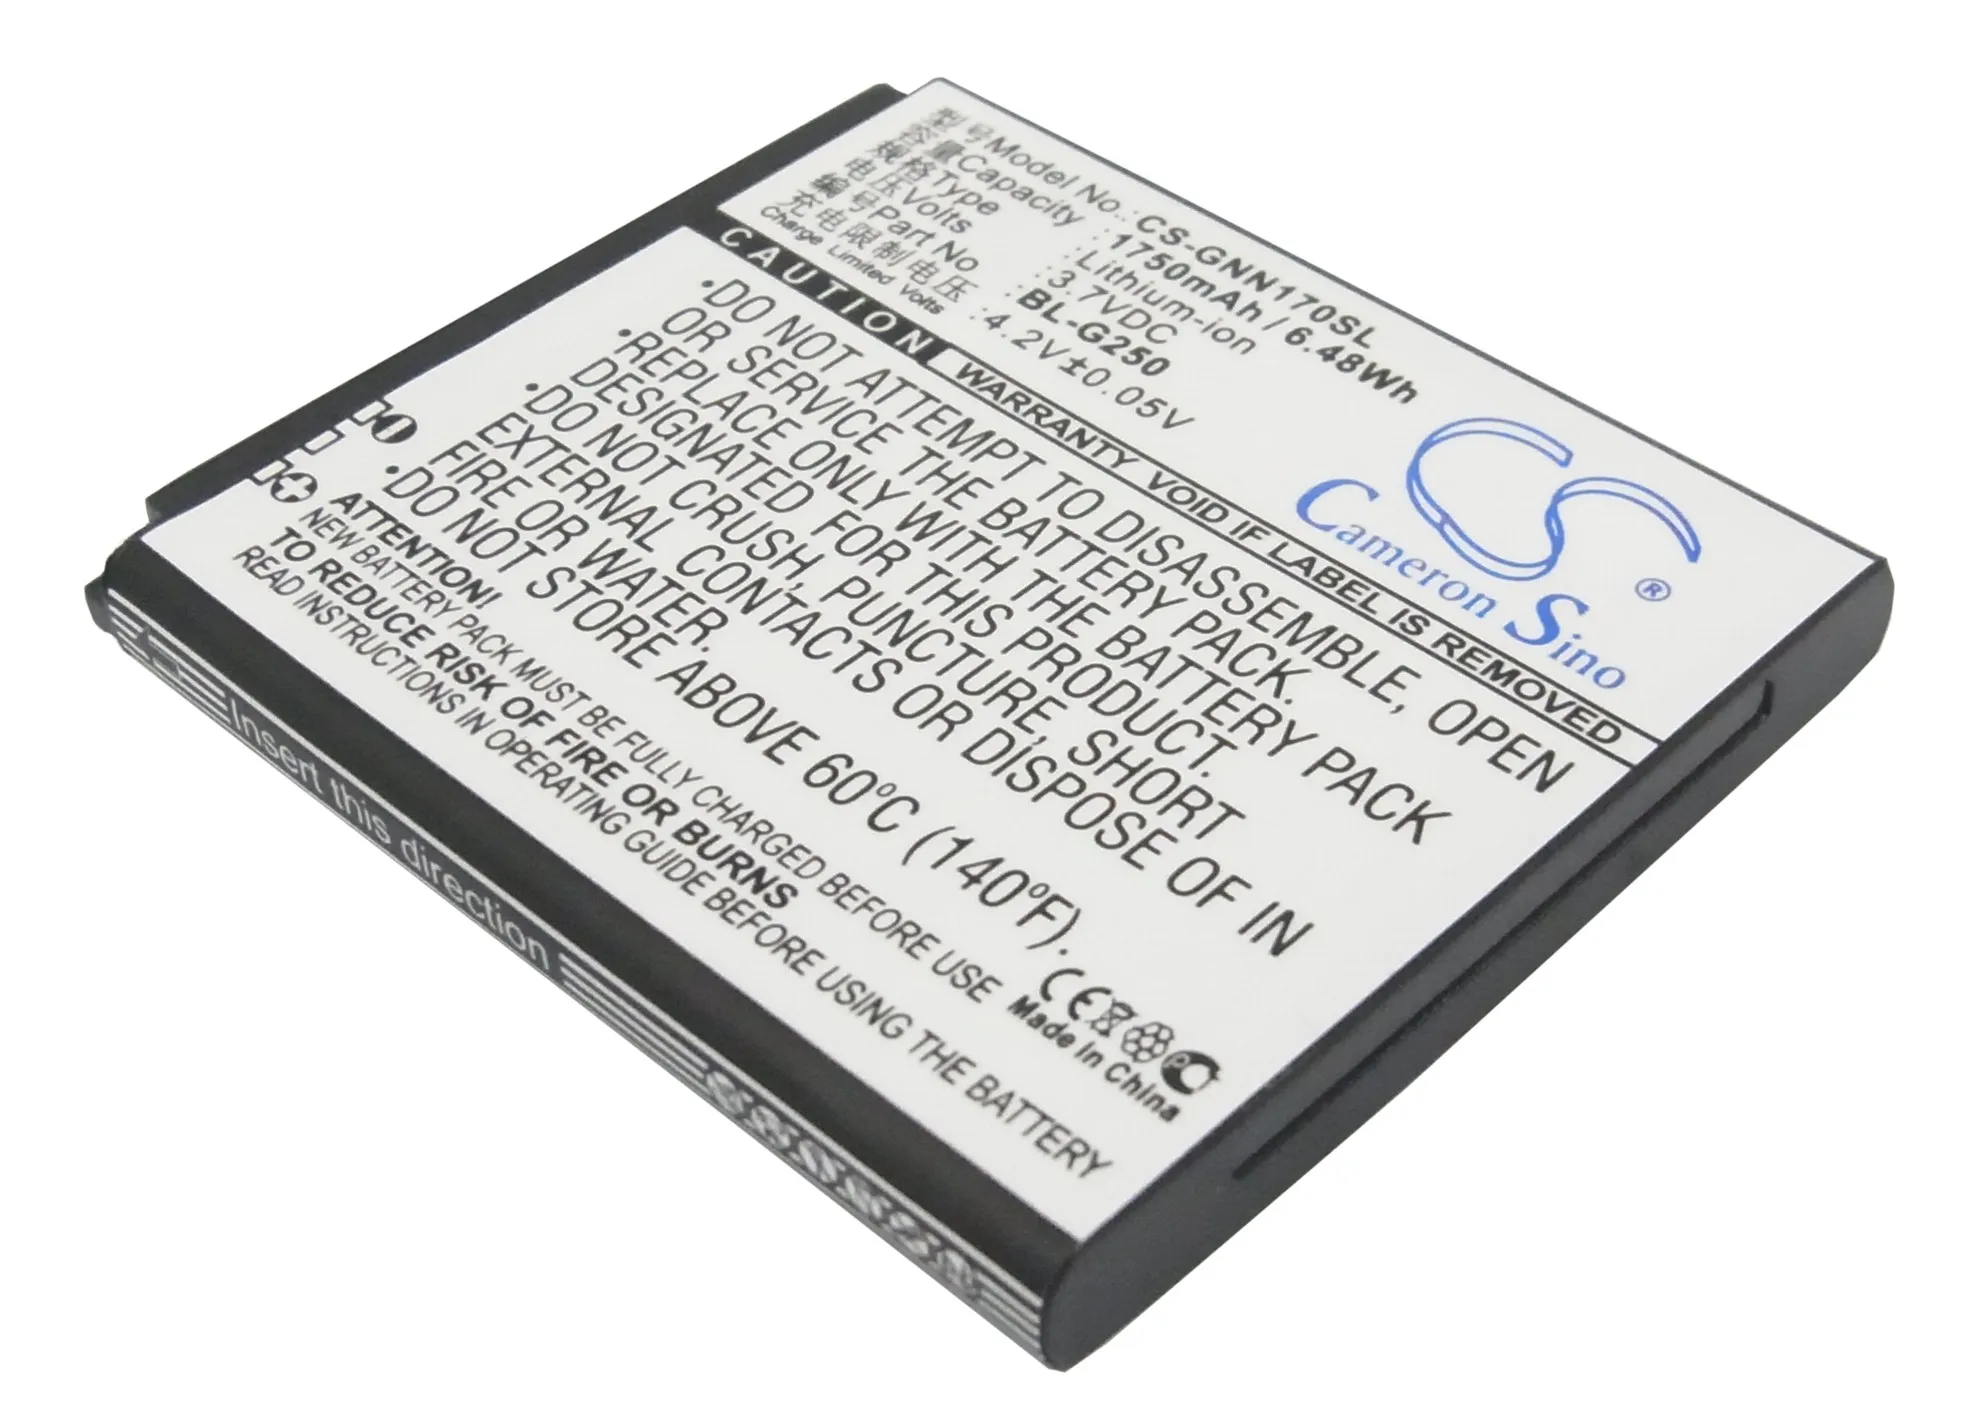 

CS 1750mAh / 6.48Wh battery for GIONEE GN170 BL-G205